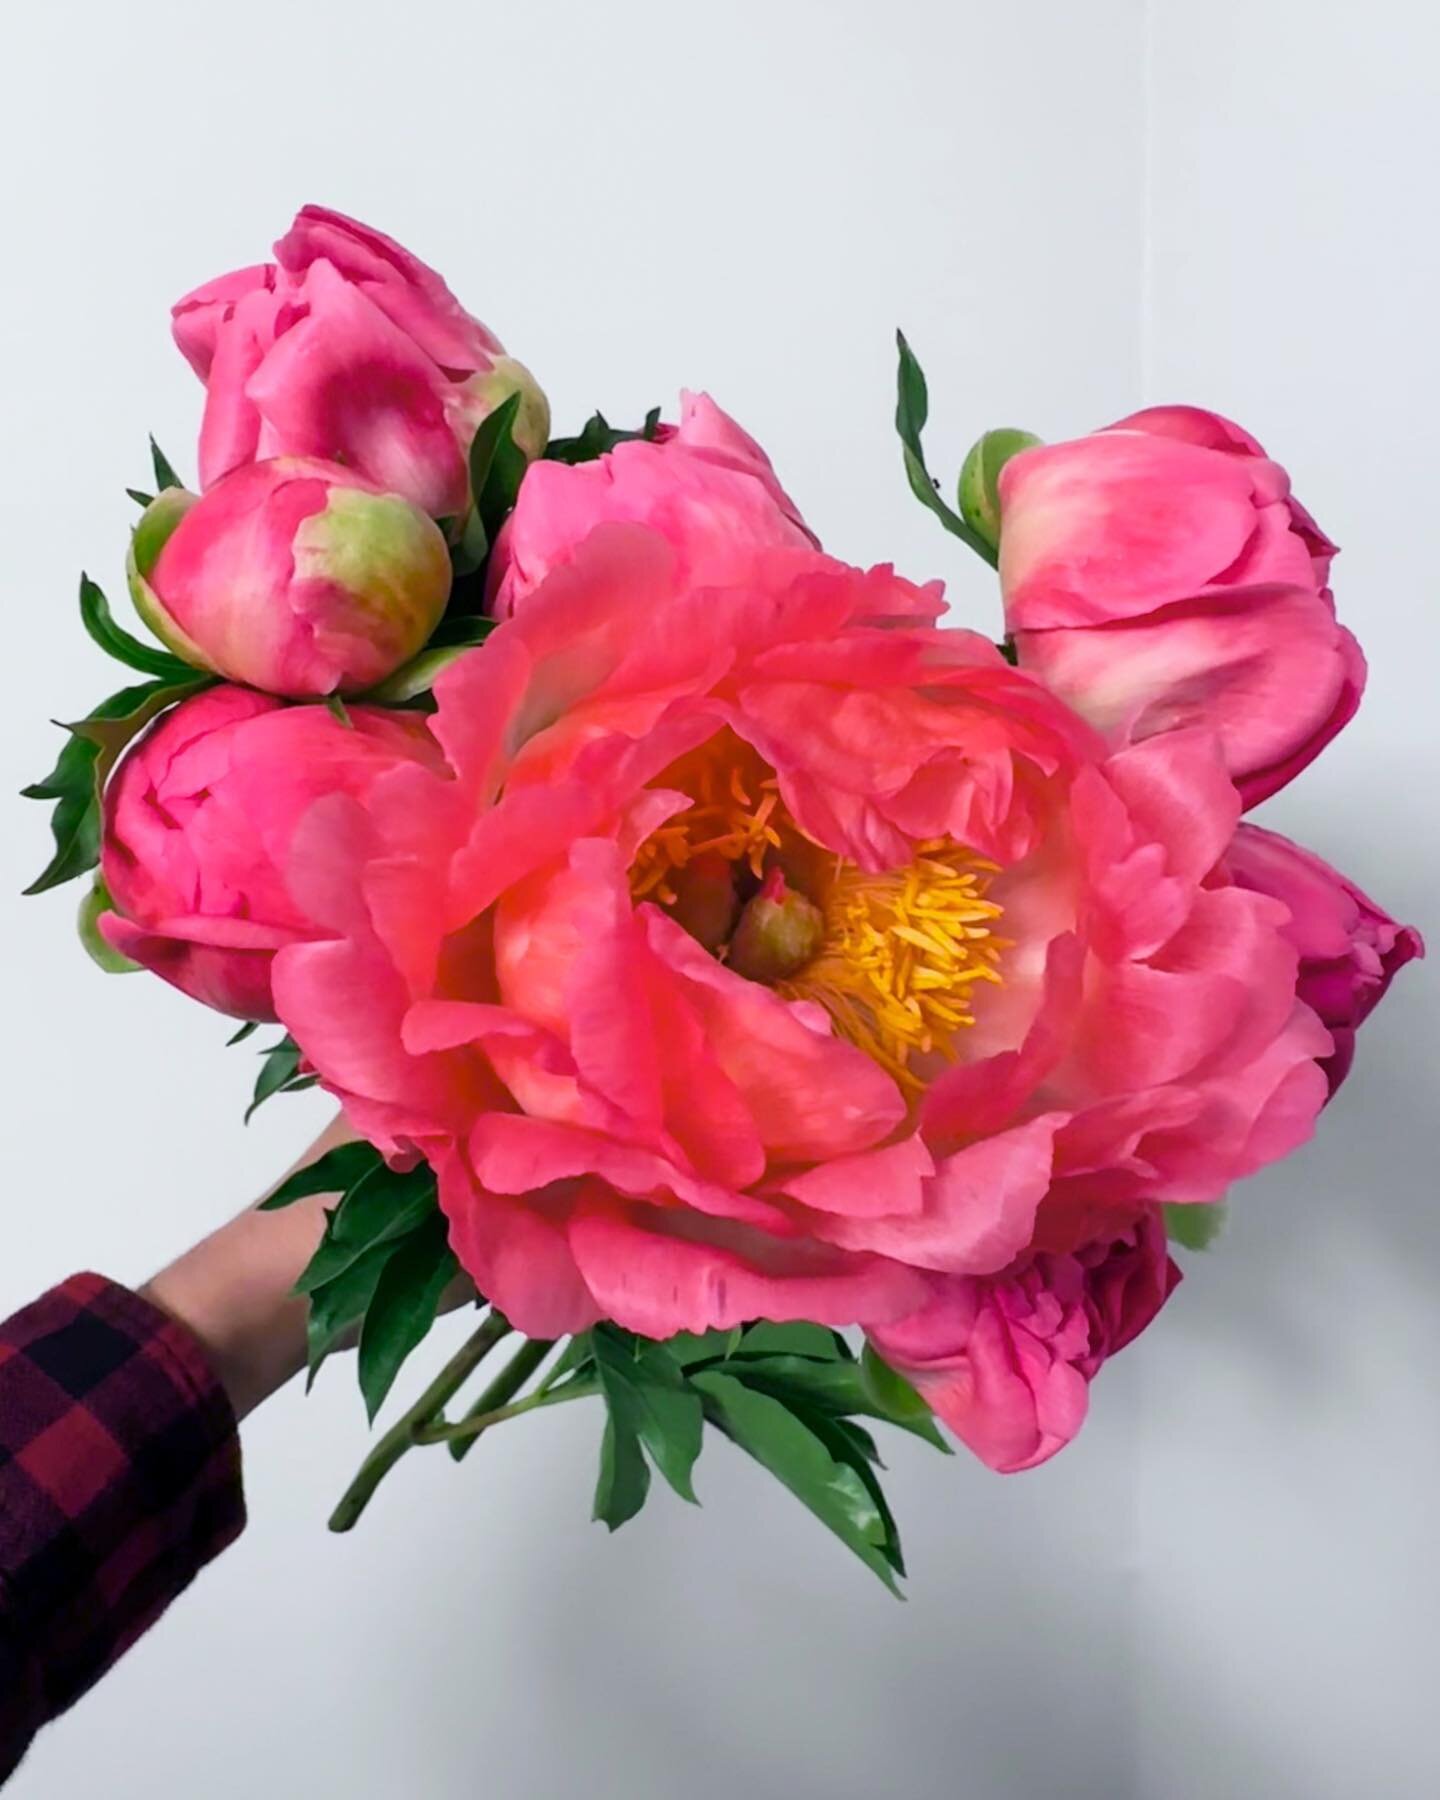 Peony season is hereeeee! 🤩

These beauties are literally GLOWING. Locals - message me if you want to get your hands on some! 🩷

#peonies #peony #localflowers #coralflowers #grownnotflown #loveflemington #americangrownflowers #bouquet #flowers